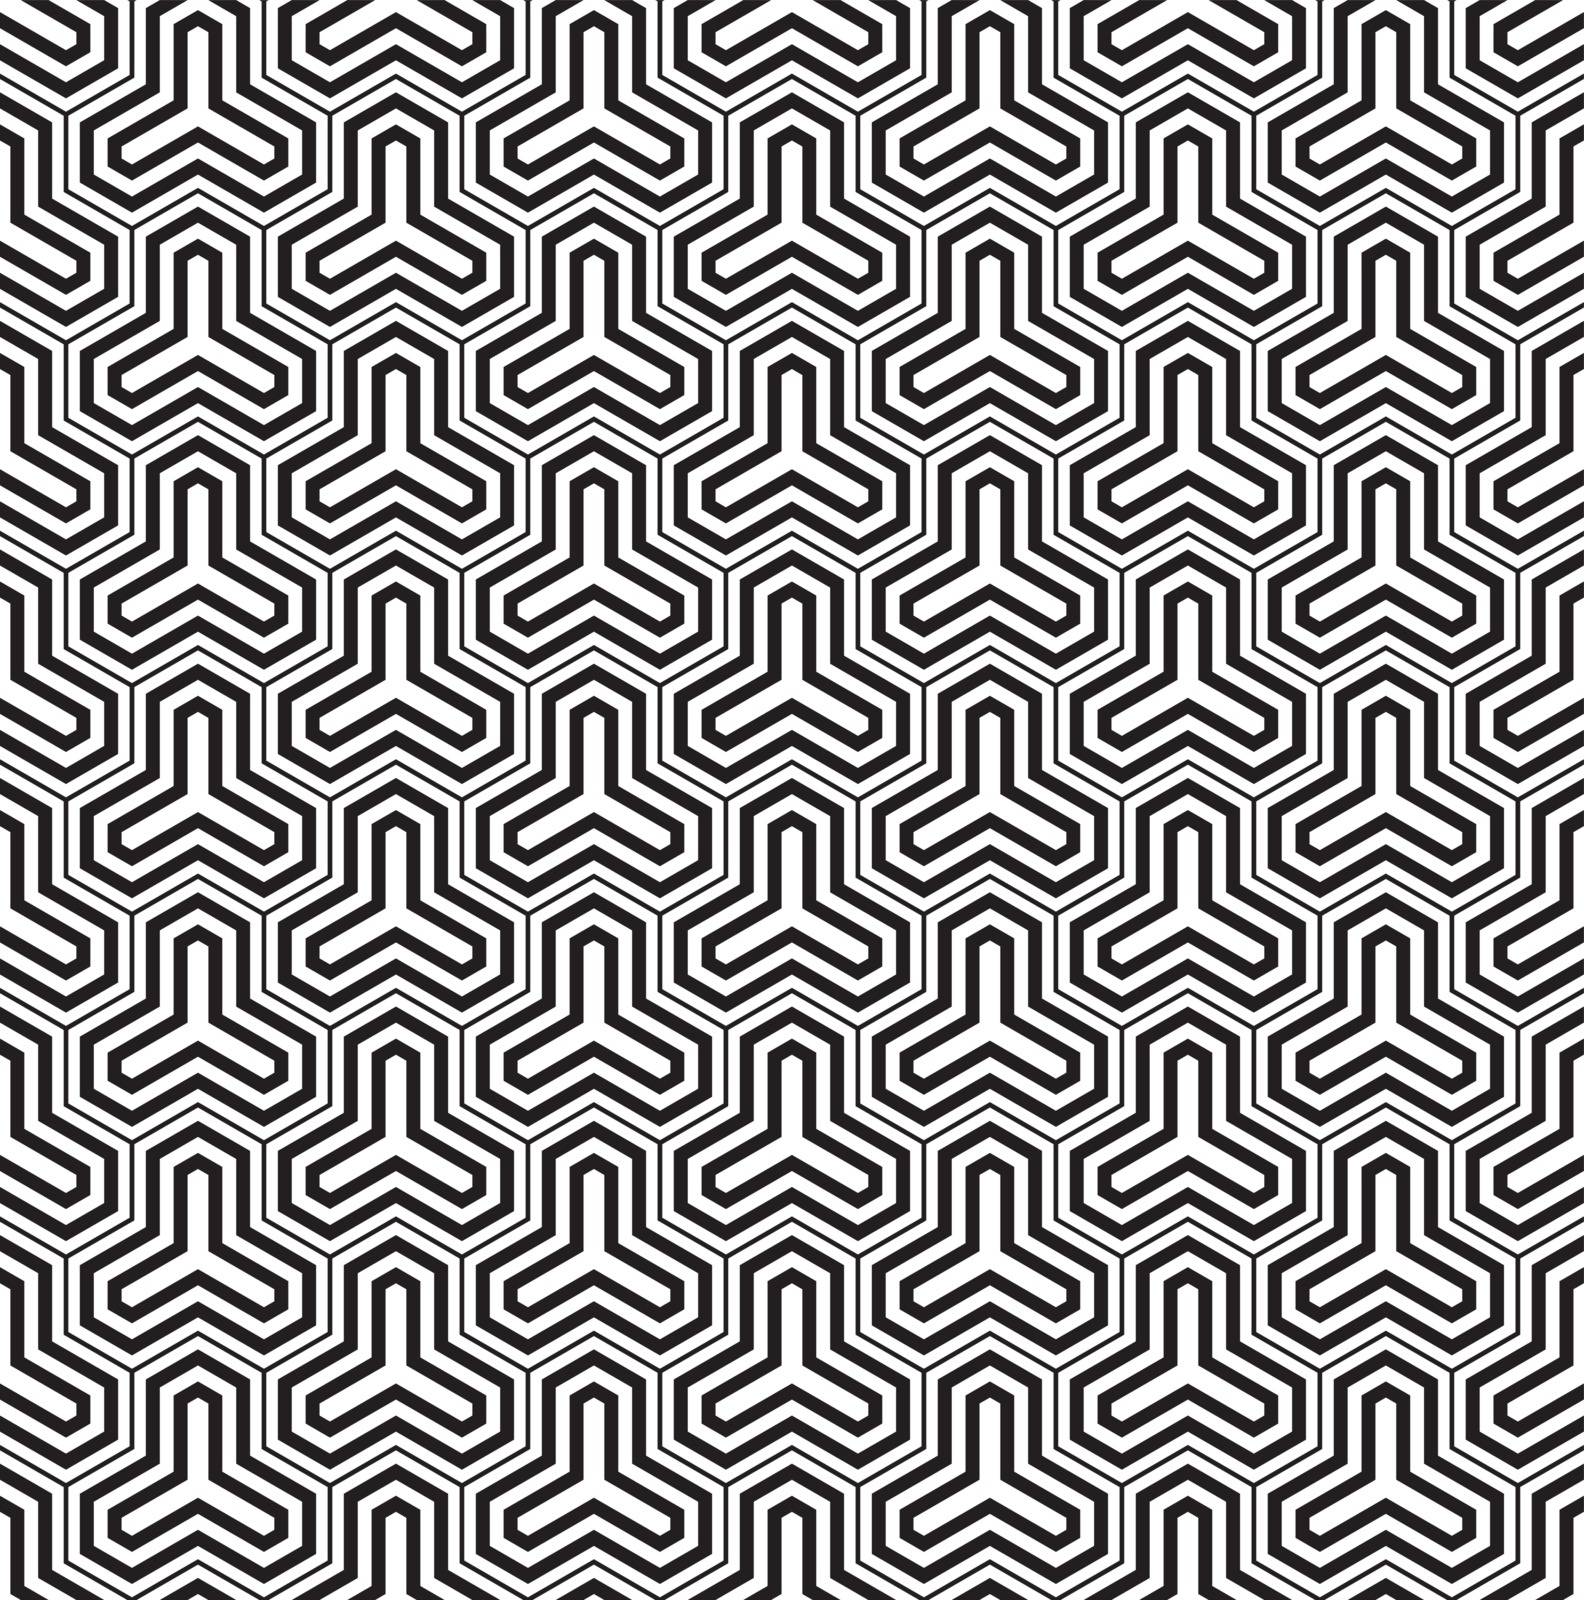 Seamless pattern in black and white in average and thick lines.